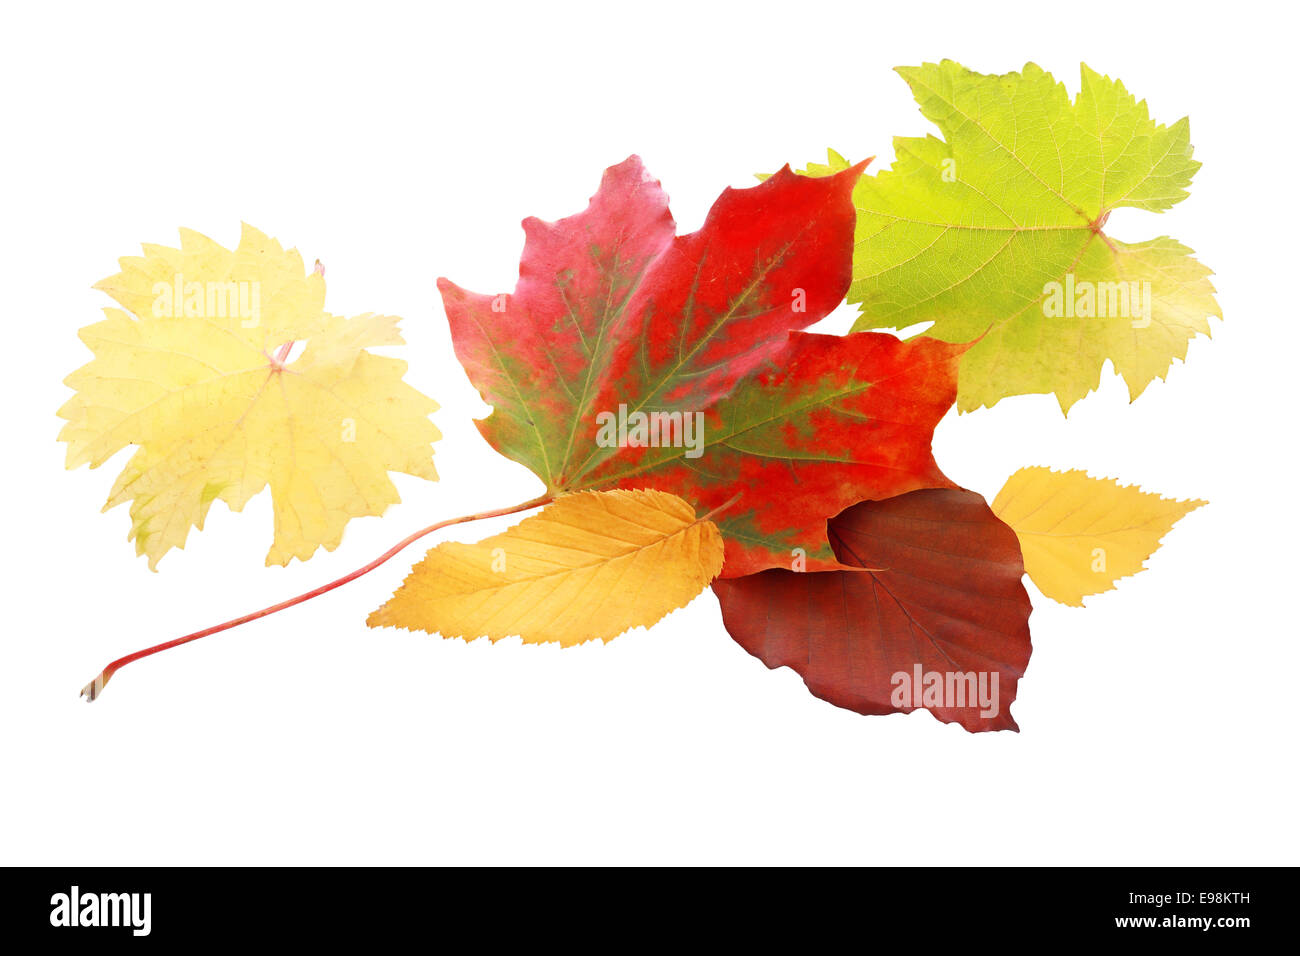 Vibrant red autumn leaf amongst a selection of leaves in yellow and green showing the colorful palette of the fall season, isolated on white Stock Photo